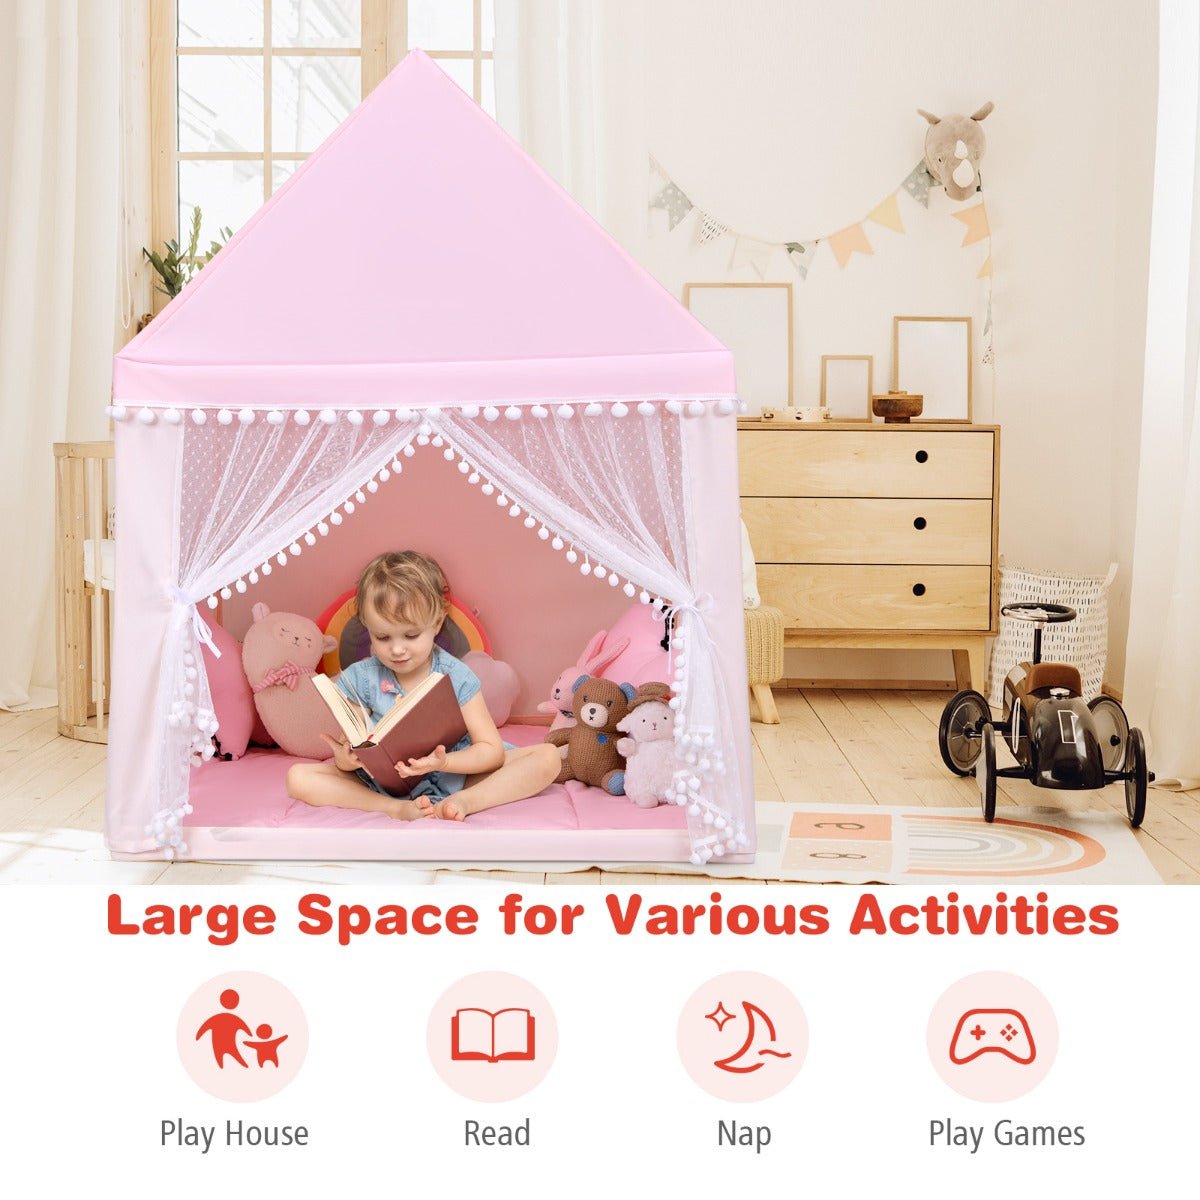 Imaginative Kids Play Space: Pink Castle Playhouse with Wood Frame & Mat